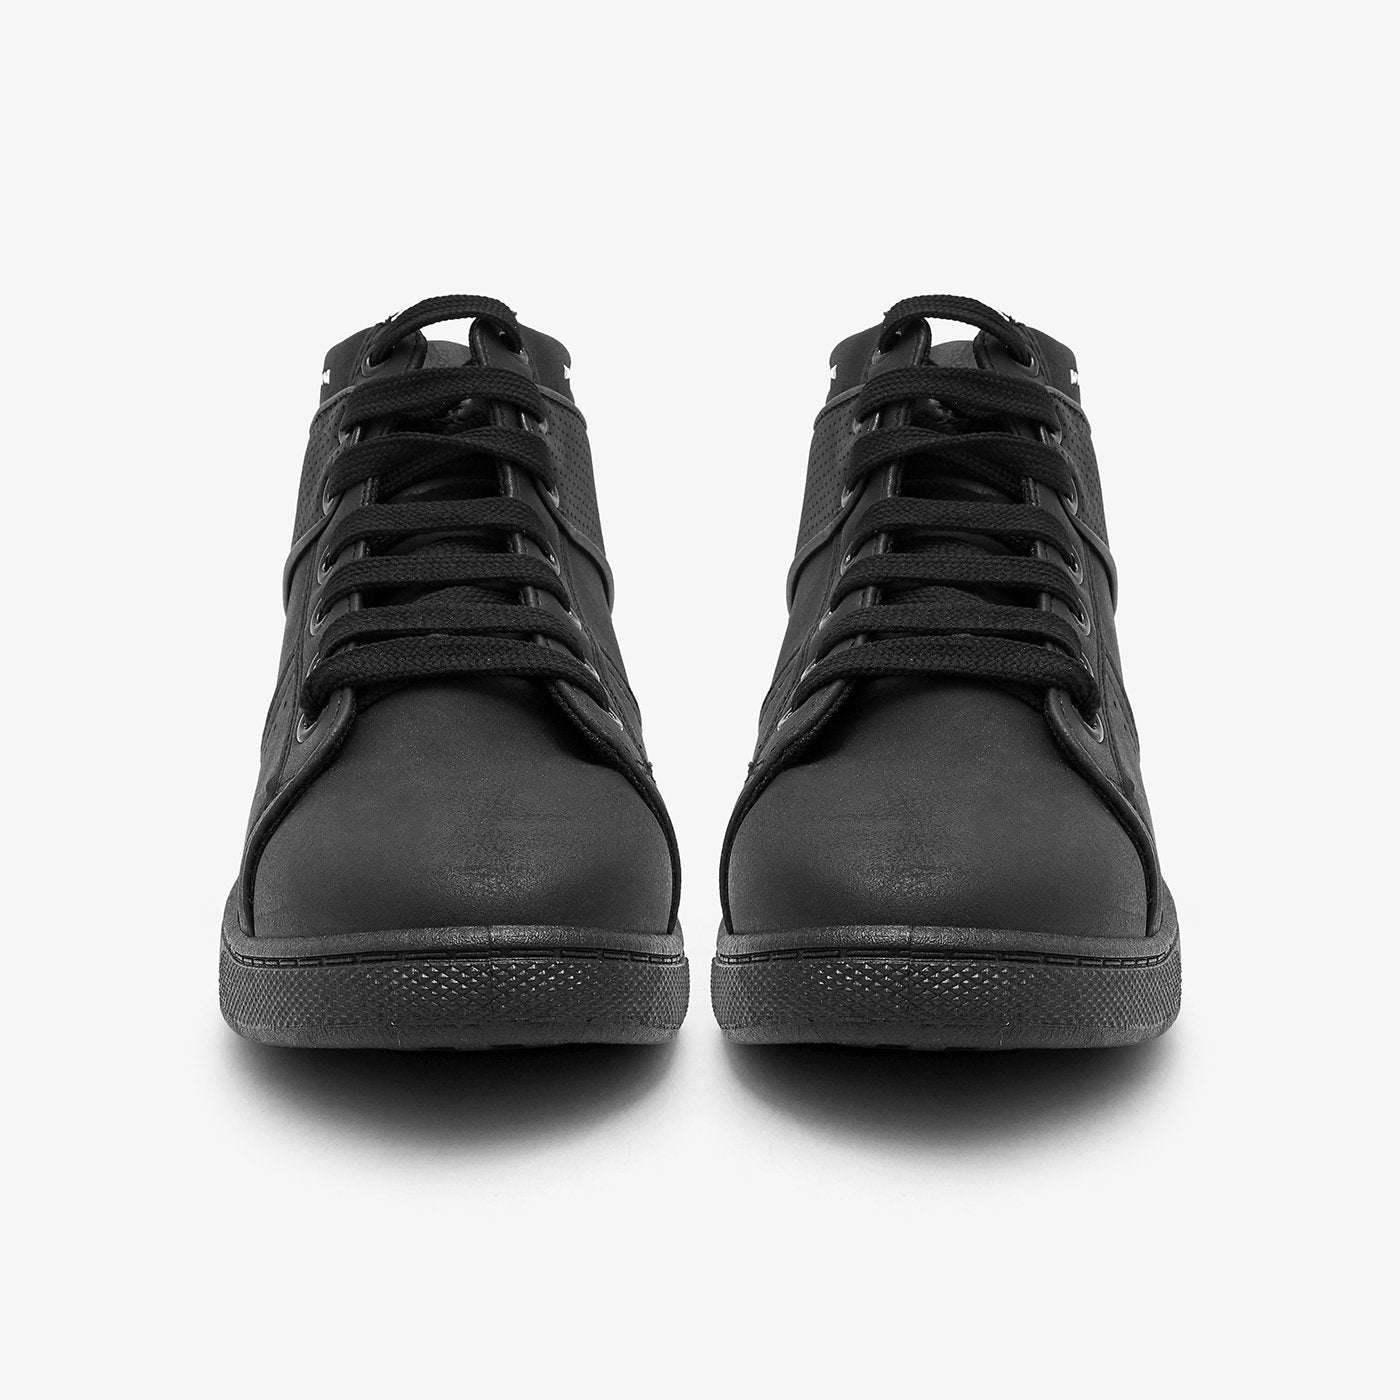 Boys Lace-Up Sneakers